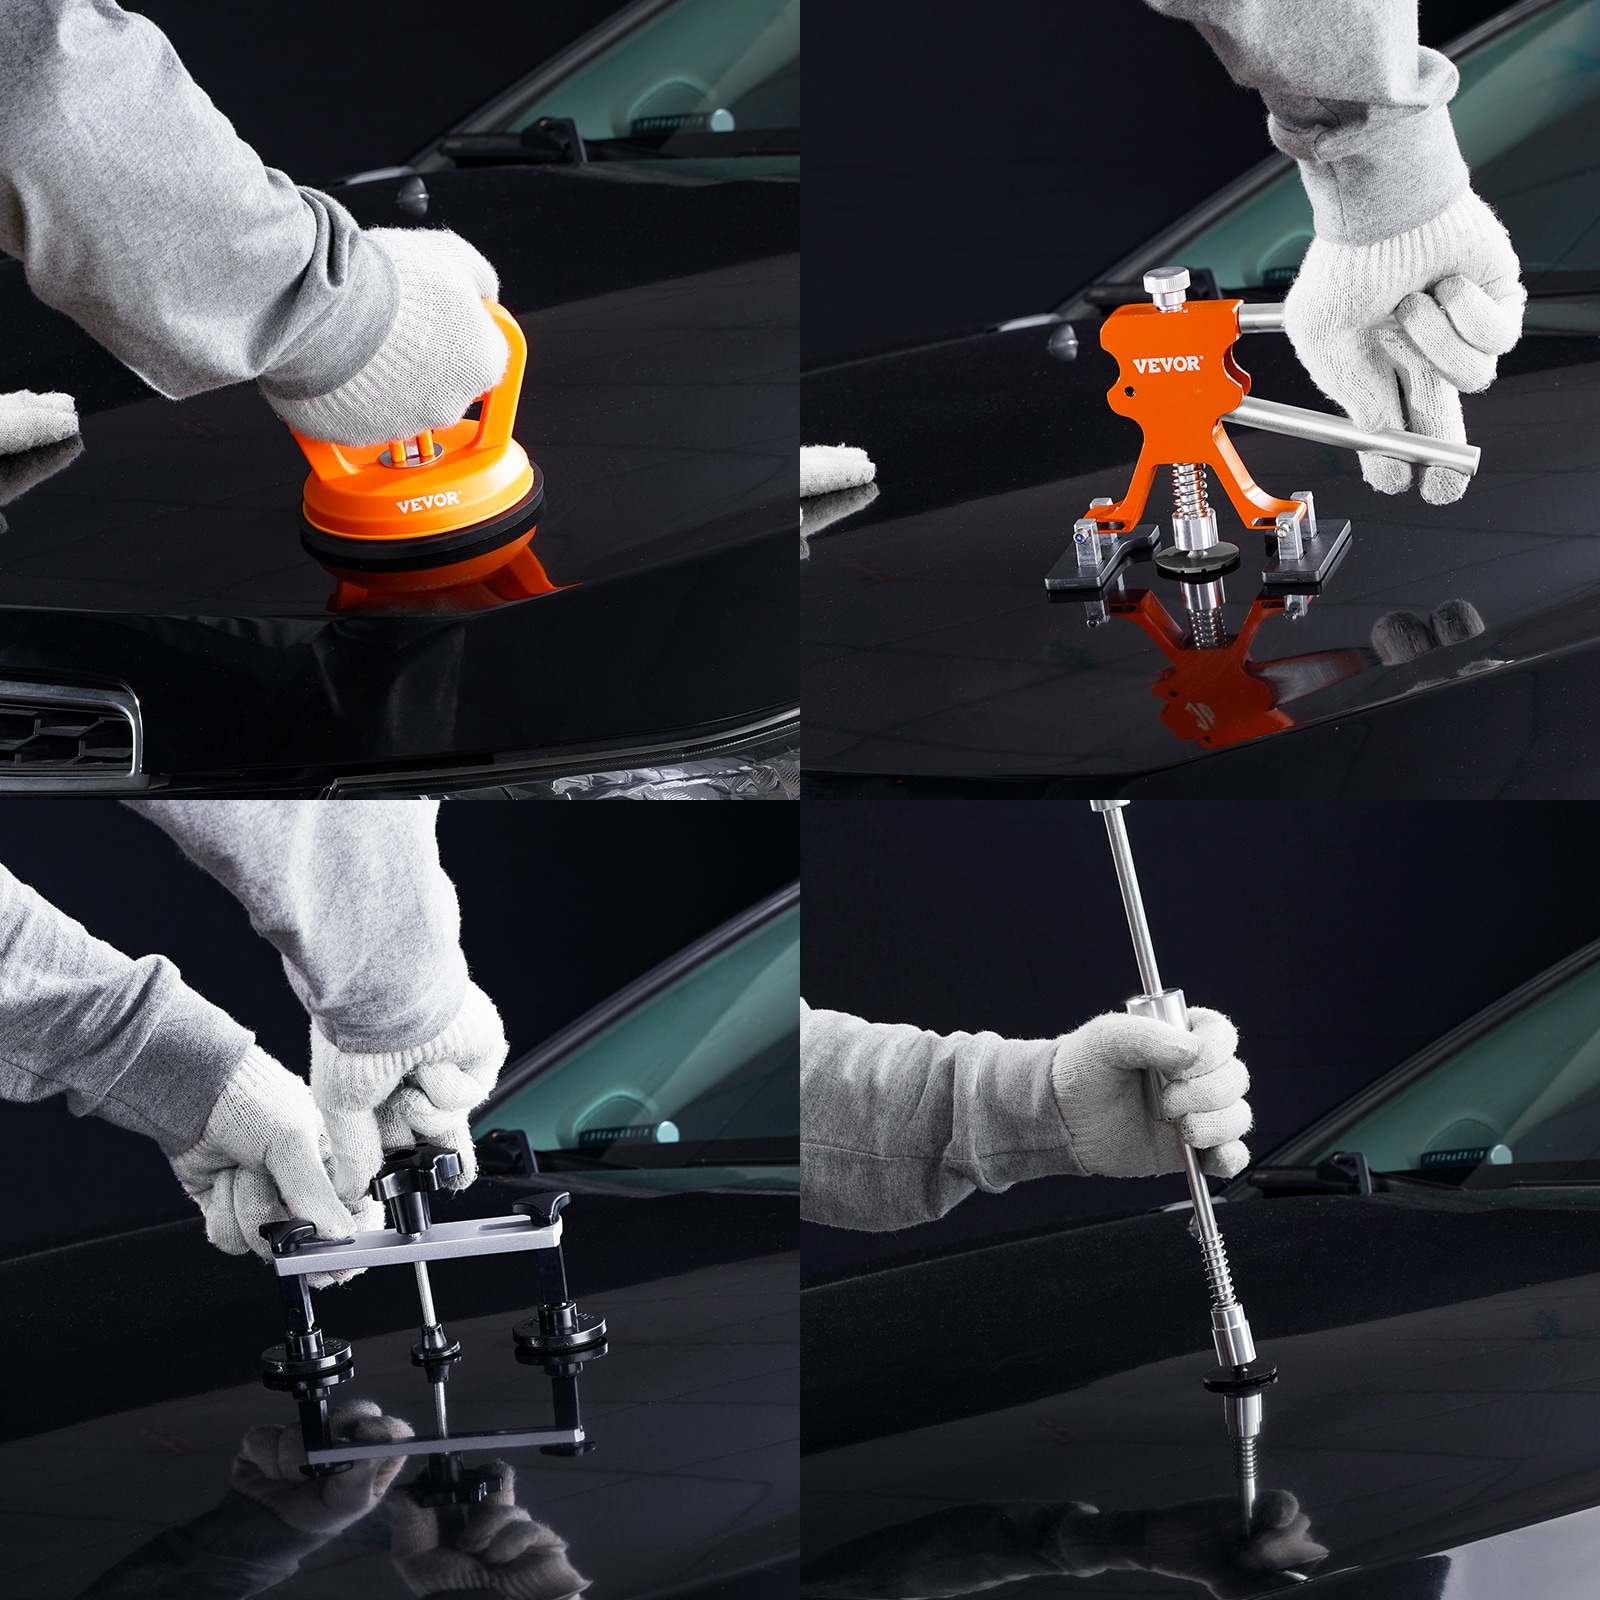 Car Tools Kit Dent Ding Hammer Tap Down Knock Down Paintless Hail Removal